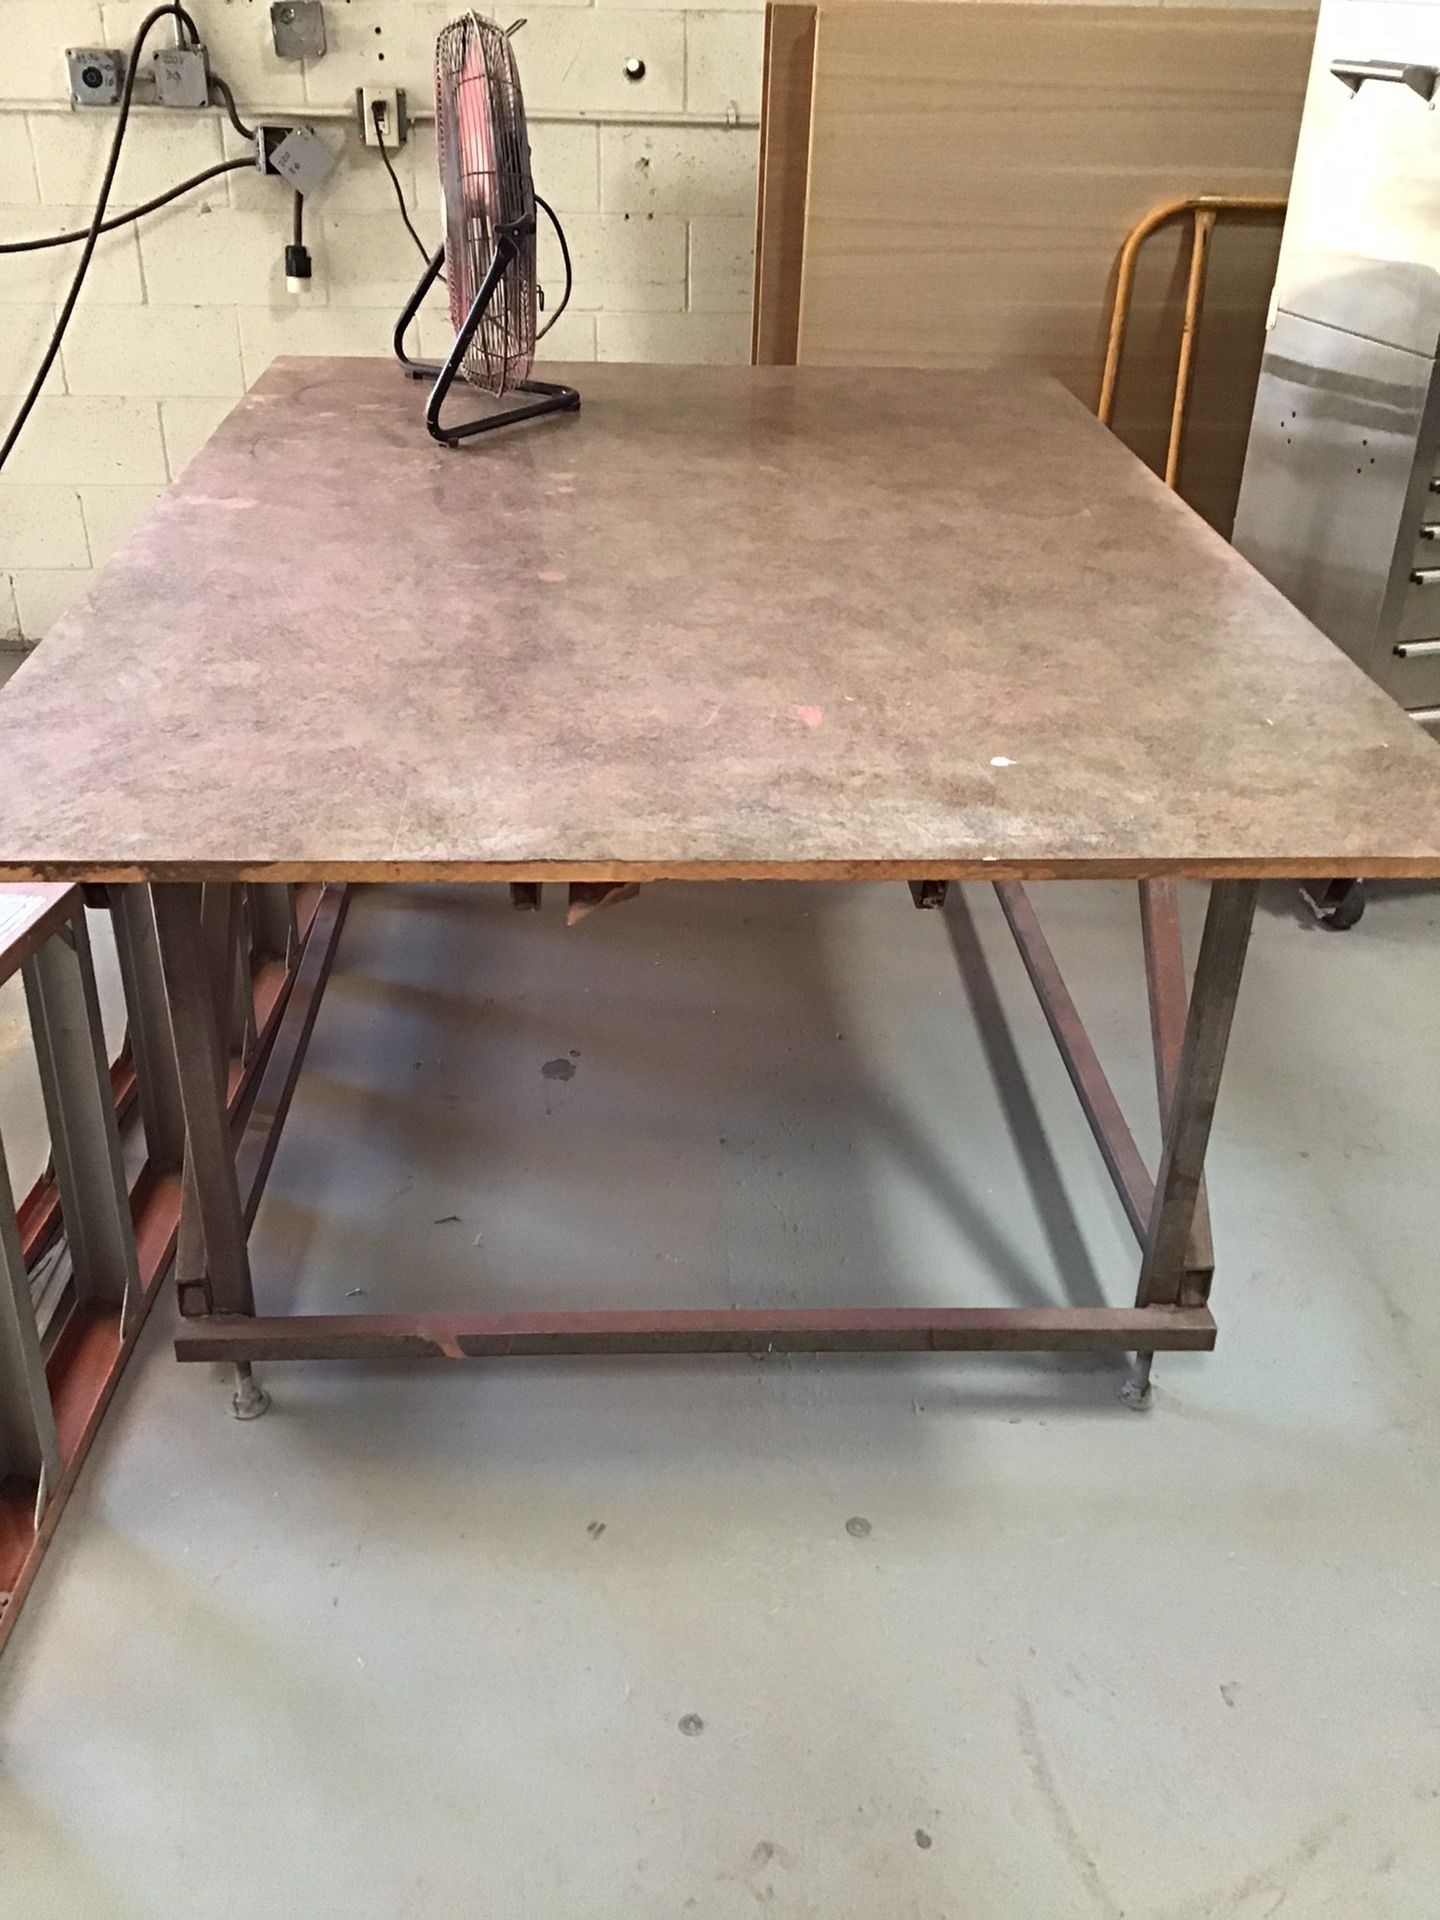 Steel working table with a laminate top - great for home project and shop work